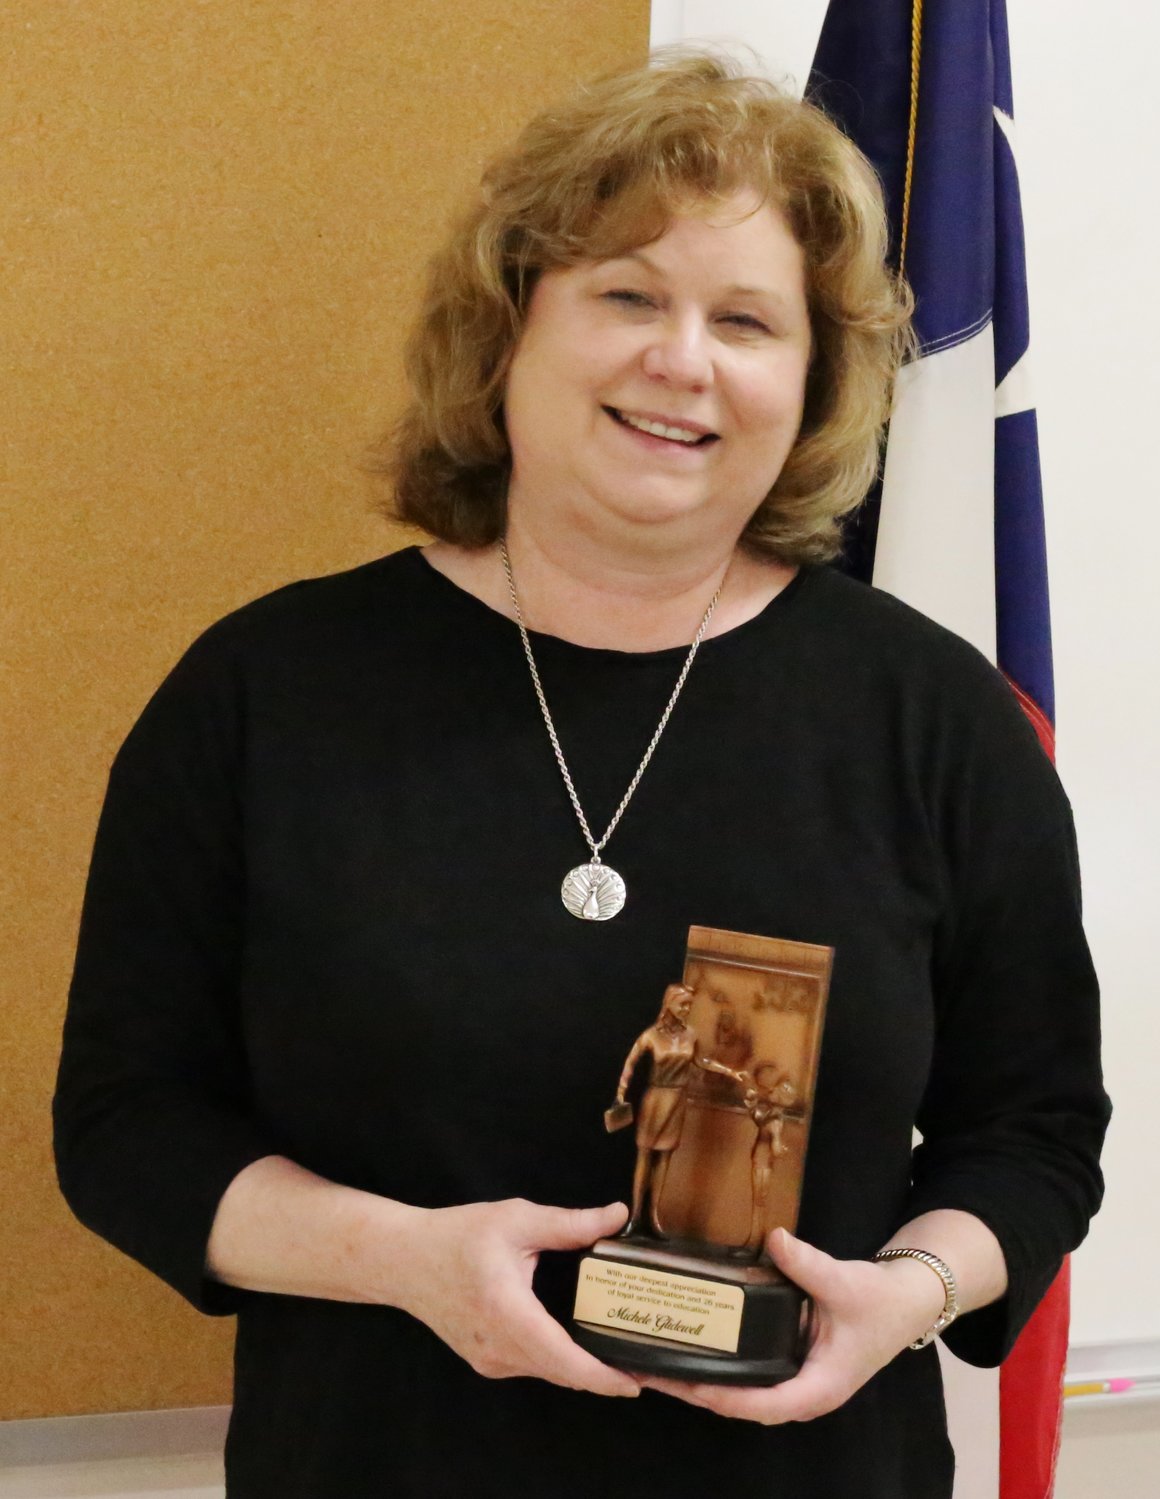 The Alba-Golden School Board opened their Monday evening meeting by recognizing the contributions of retiring Curriculum Director Michele Glidewell.